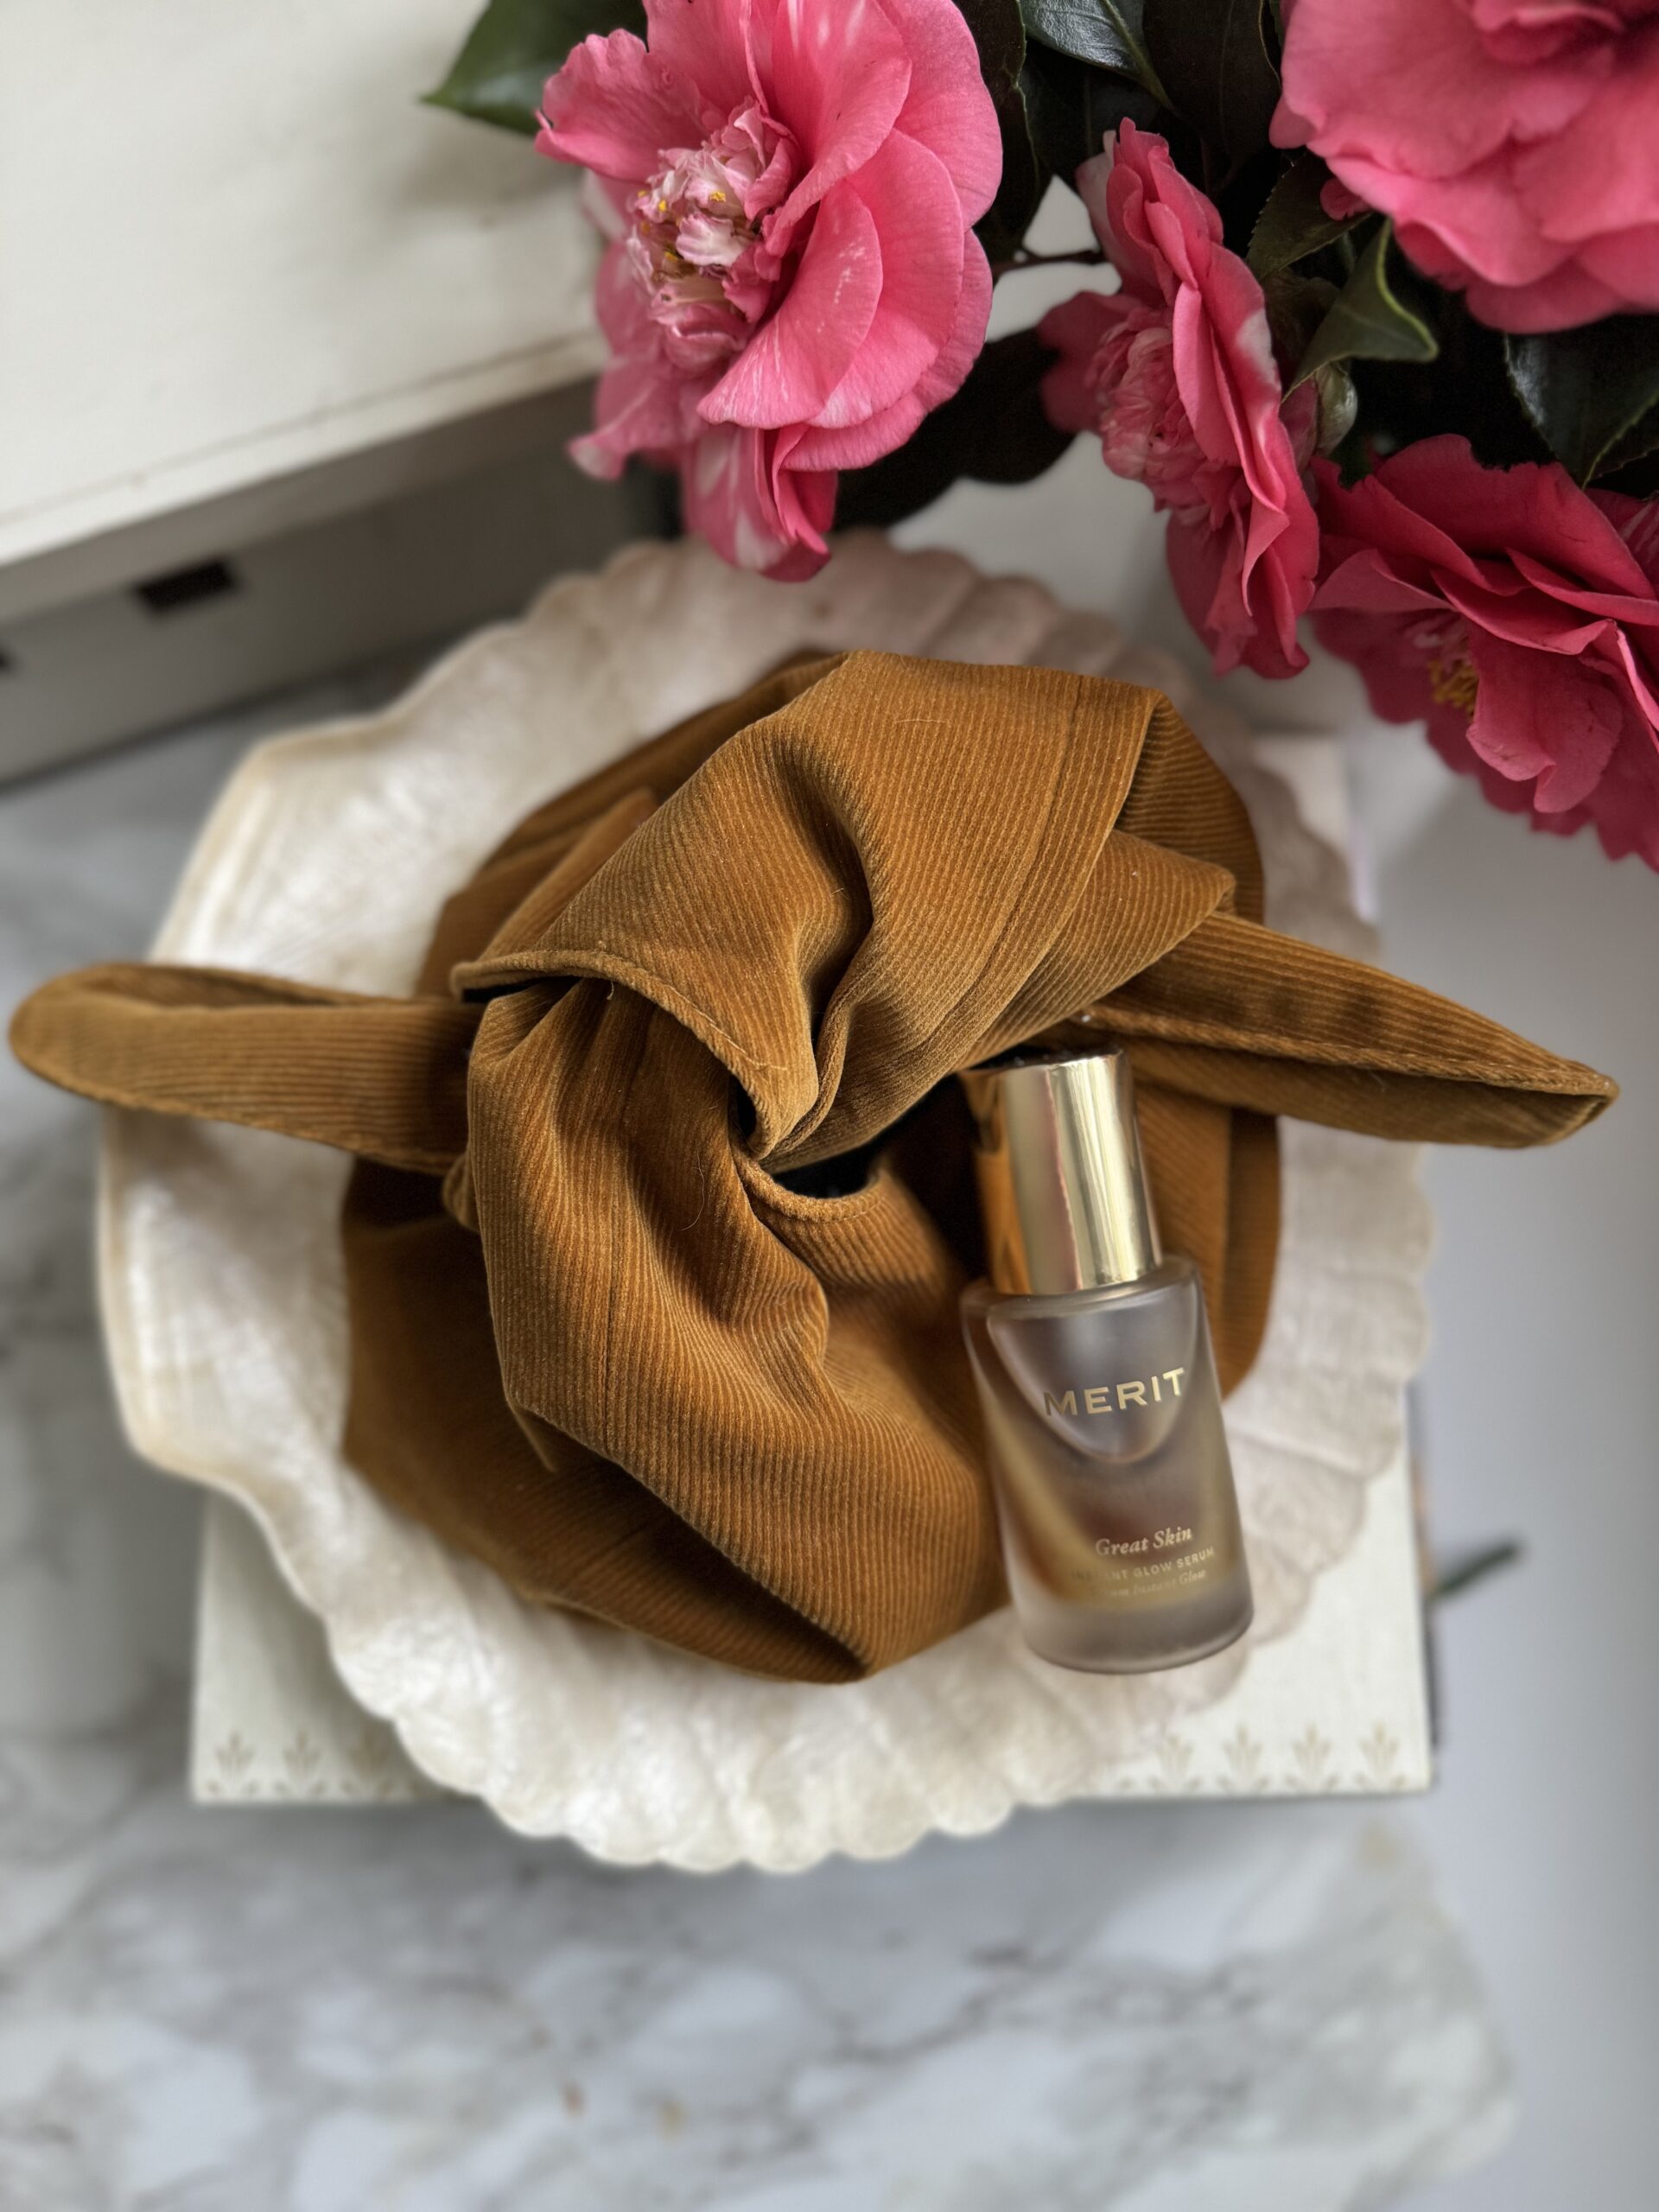 A beauty product placed on a textured brown cloth next to pink flowers on a white surface.